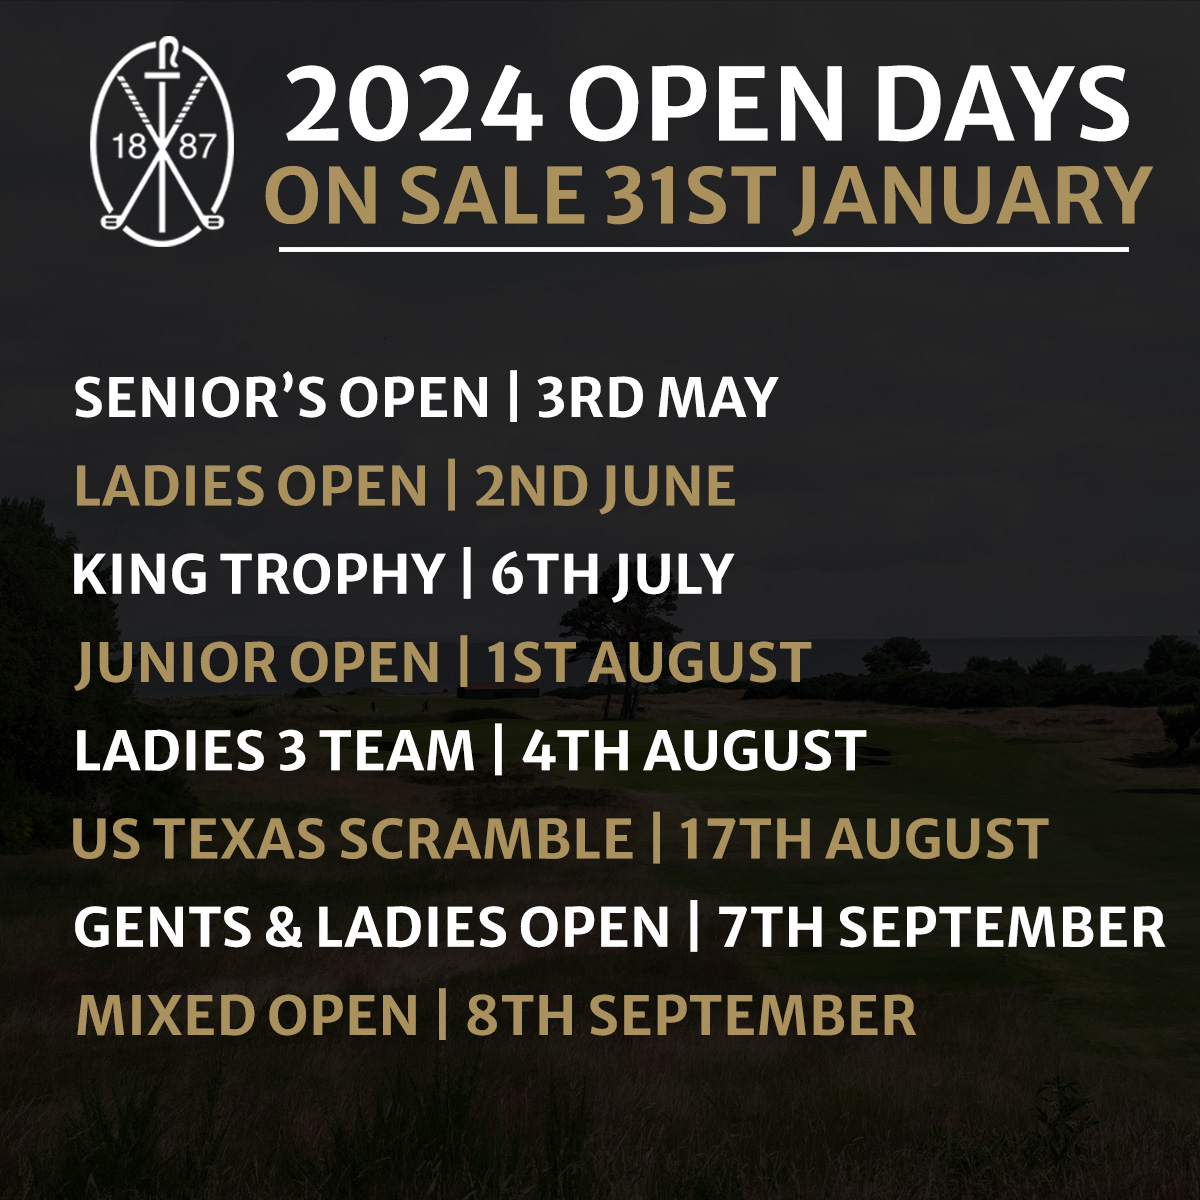 Dates for your diary in 2024 📅 We have a wide variety of open competitions to choose from throughout the year, note them in your diary ahead of next week's launch. On sale: 12pm on 31st January